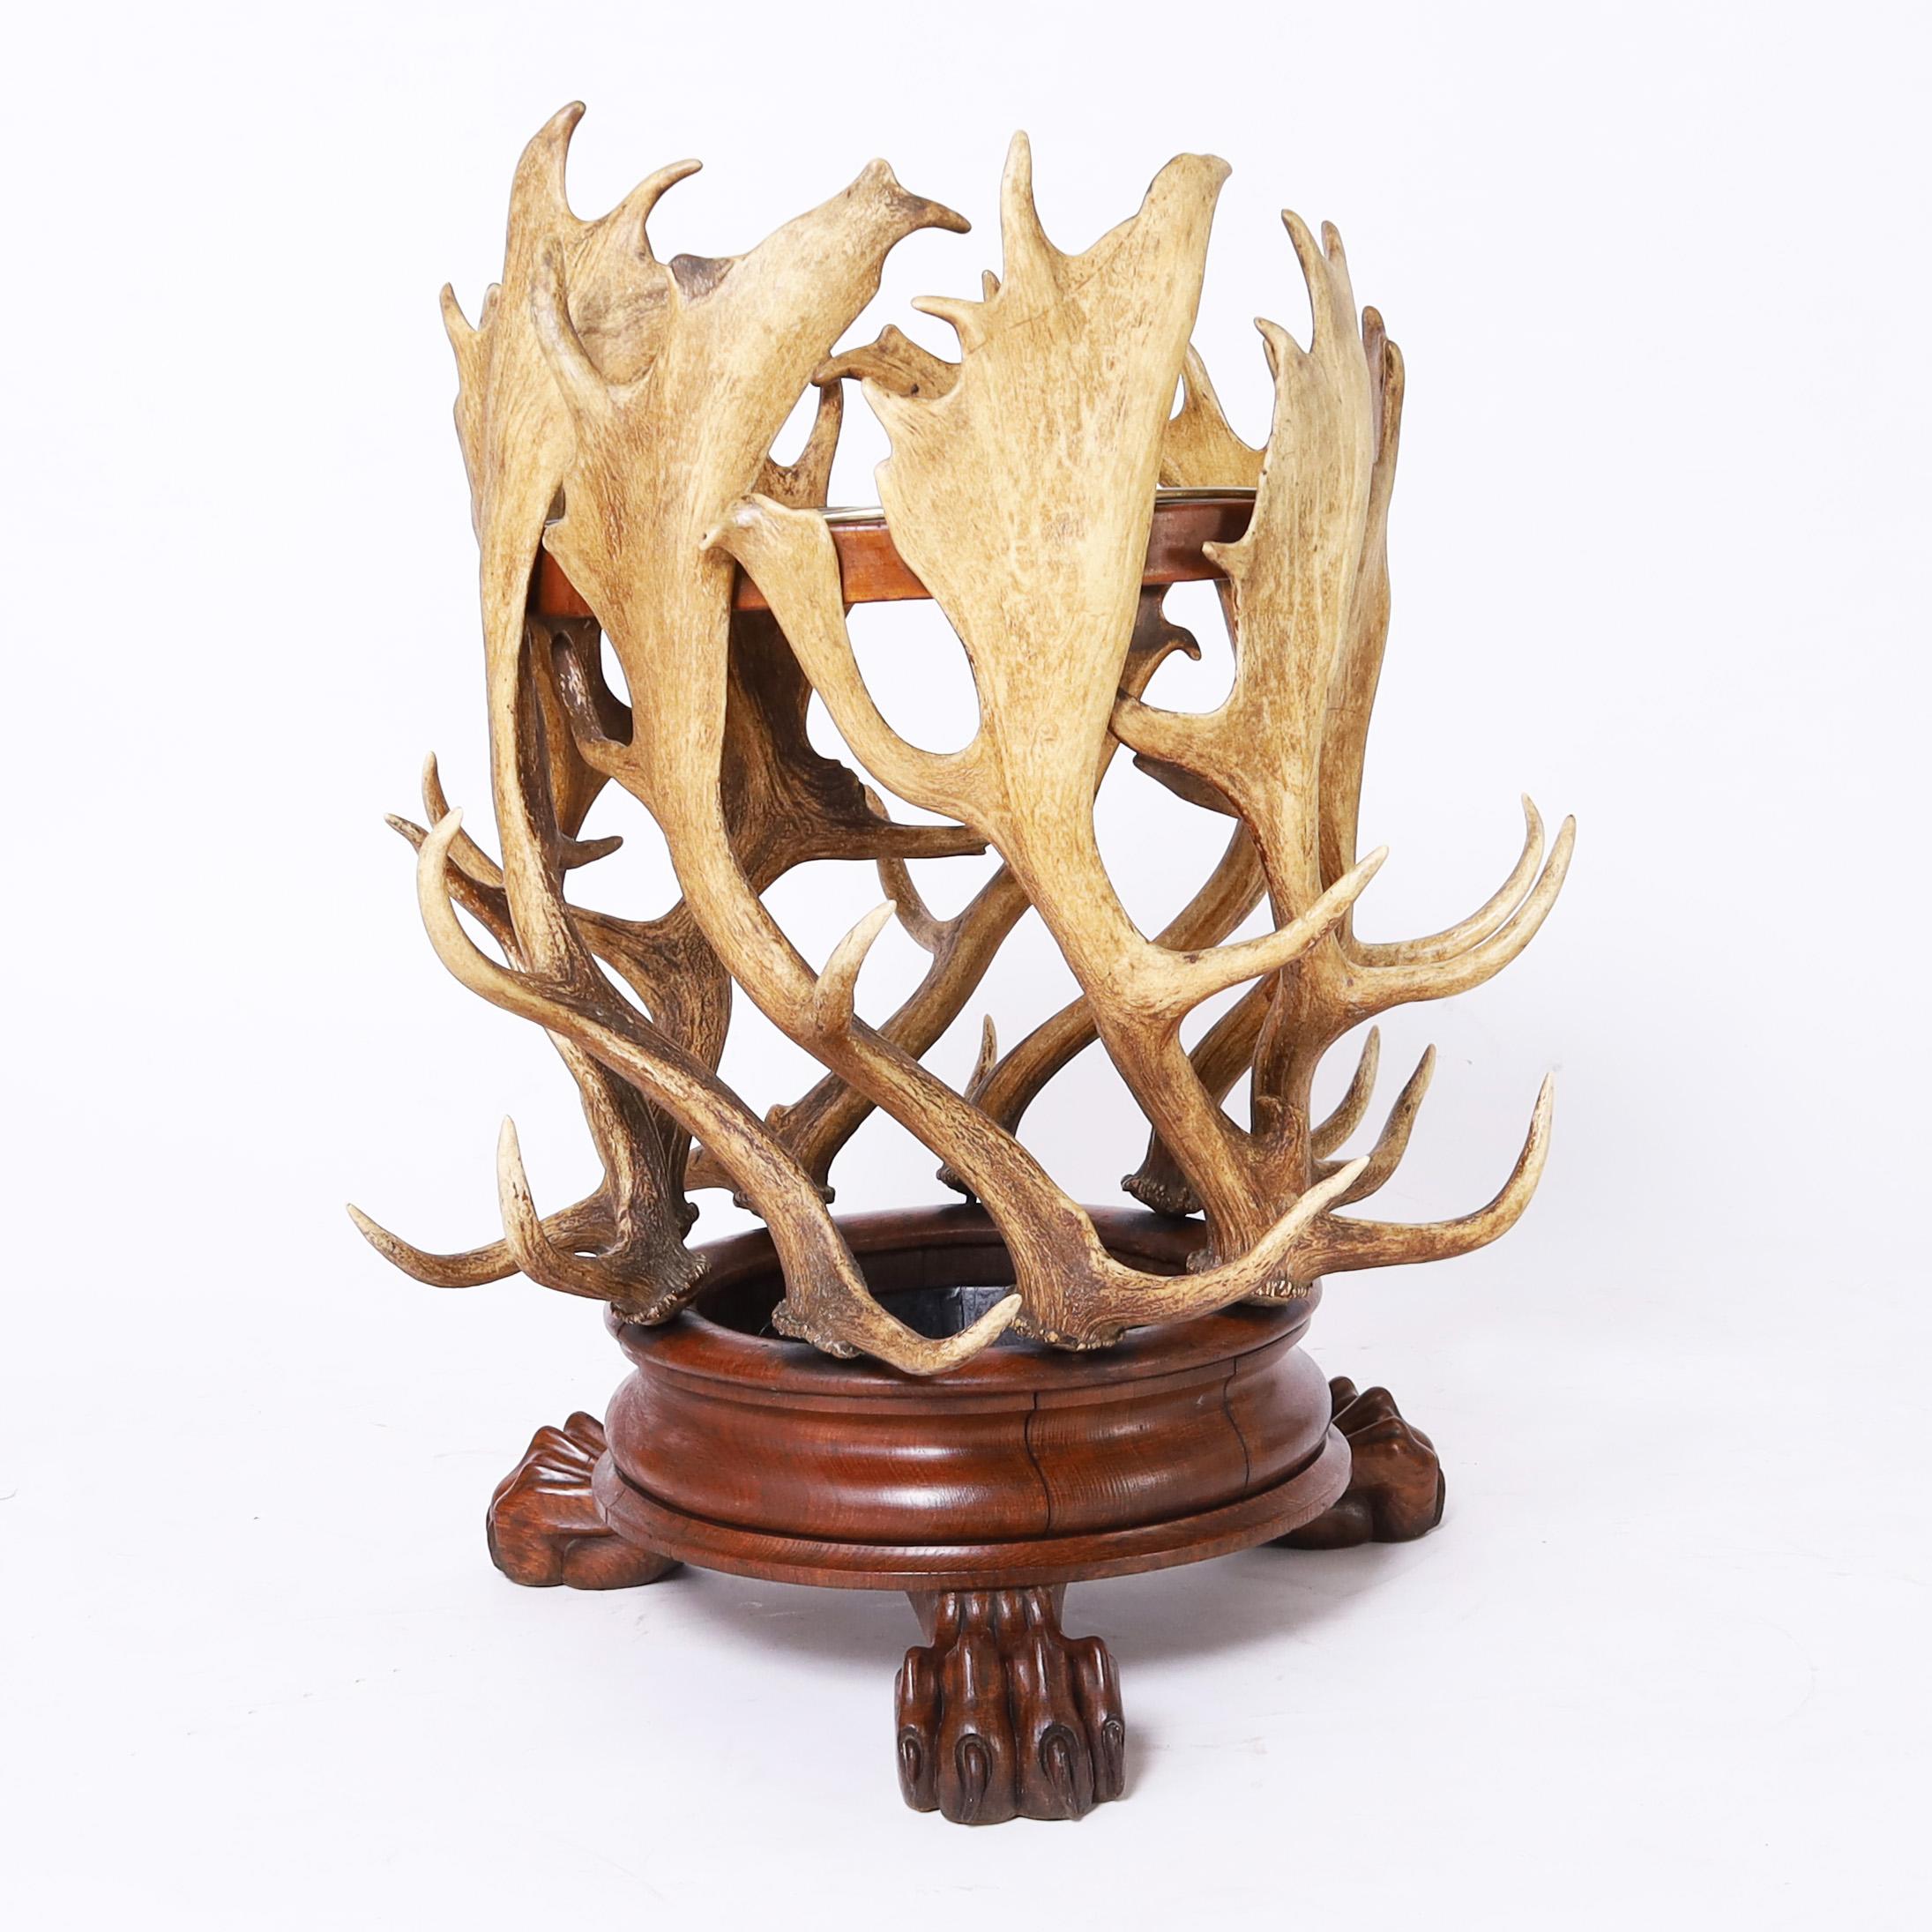 Rare and unusual antique umbrella or cane stand crafted with organic moose horns or antlers on a circular oak base with three carved oak paw feet.